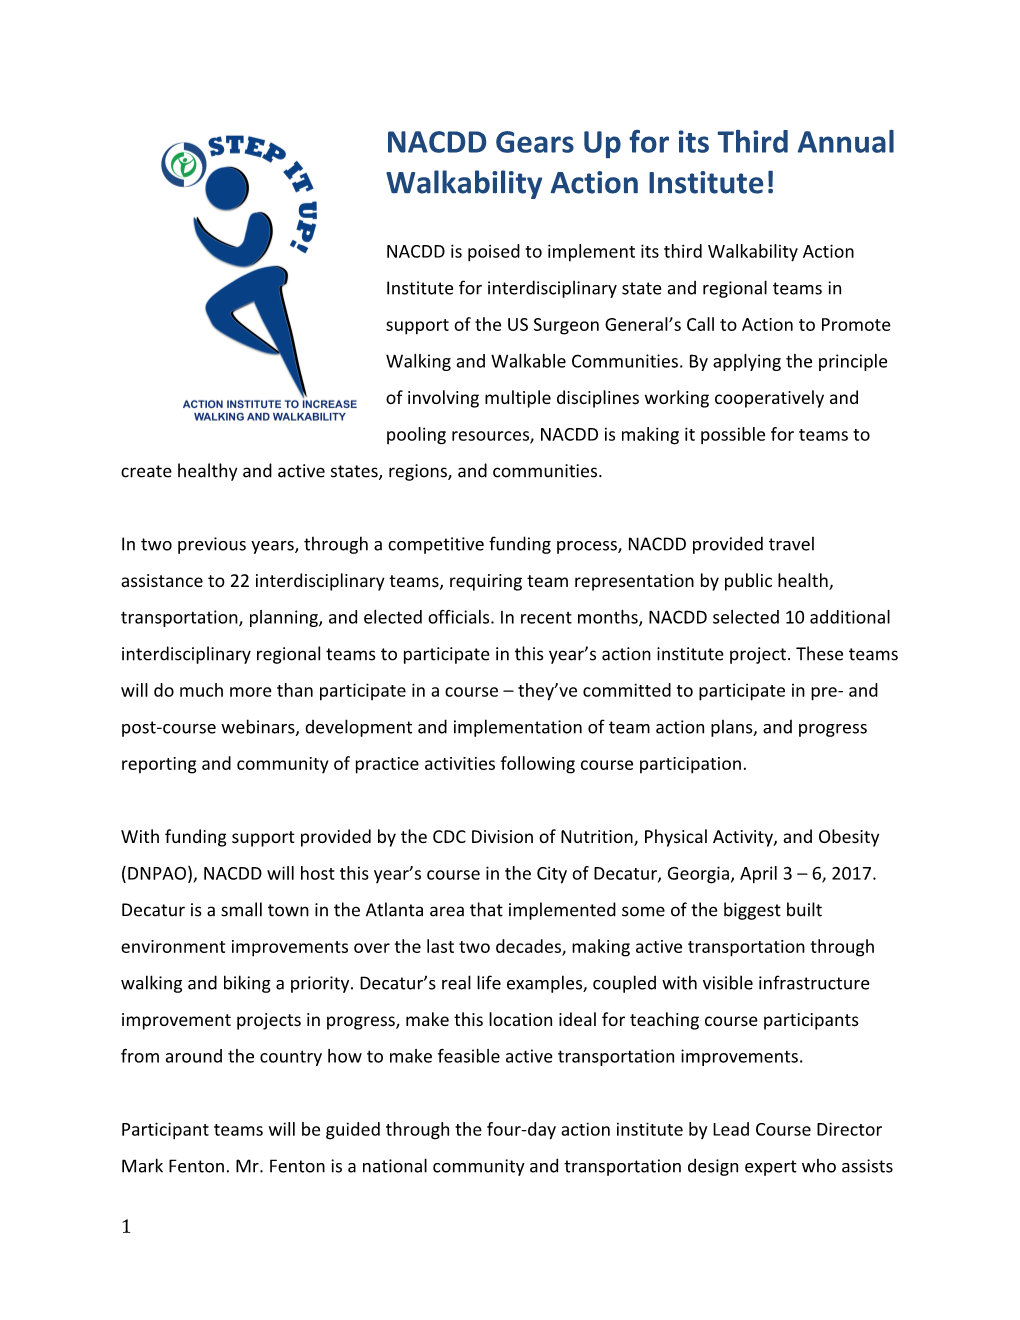 NACD D Gears up for Its Third Annual Walkability Action Institute!